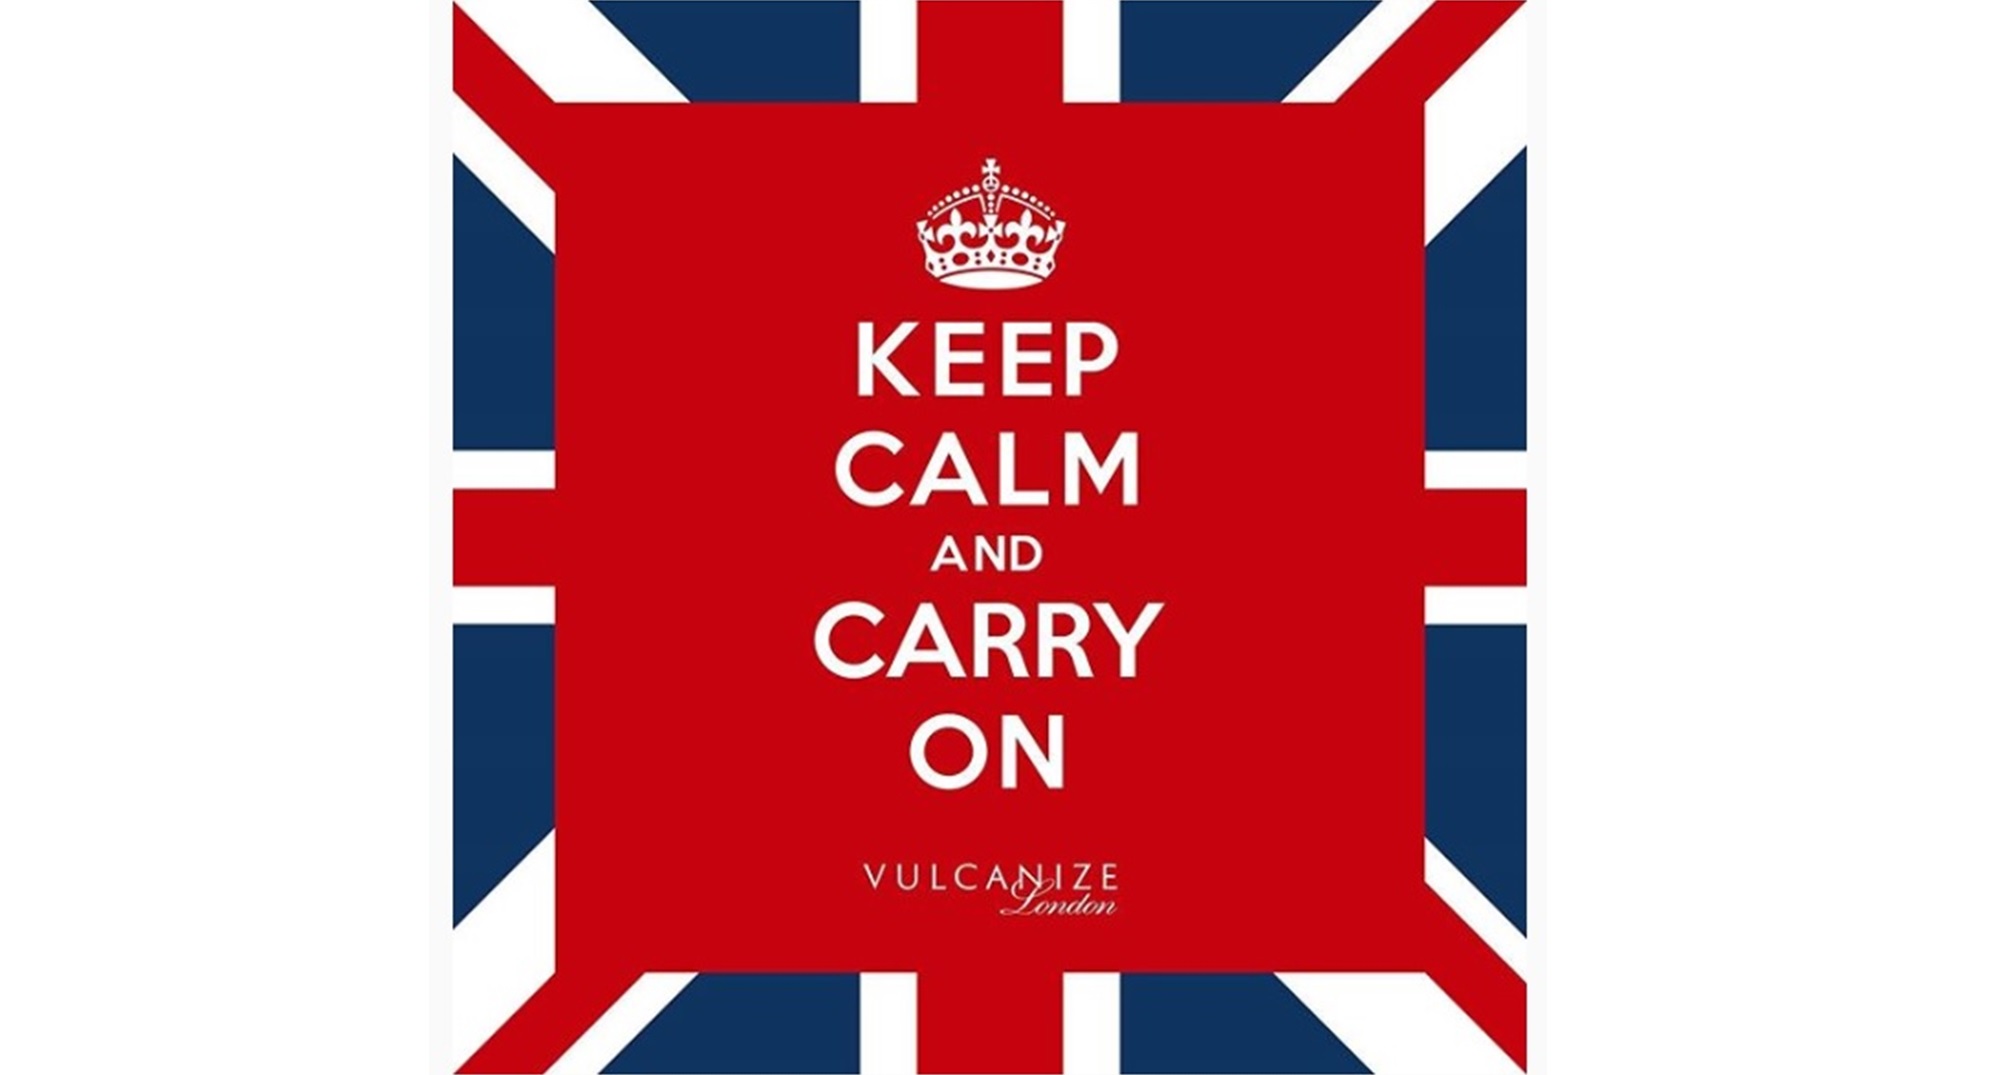 KEEP CALM AND CARRY ON。